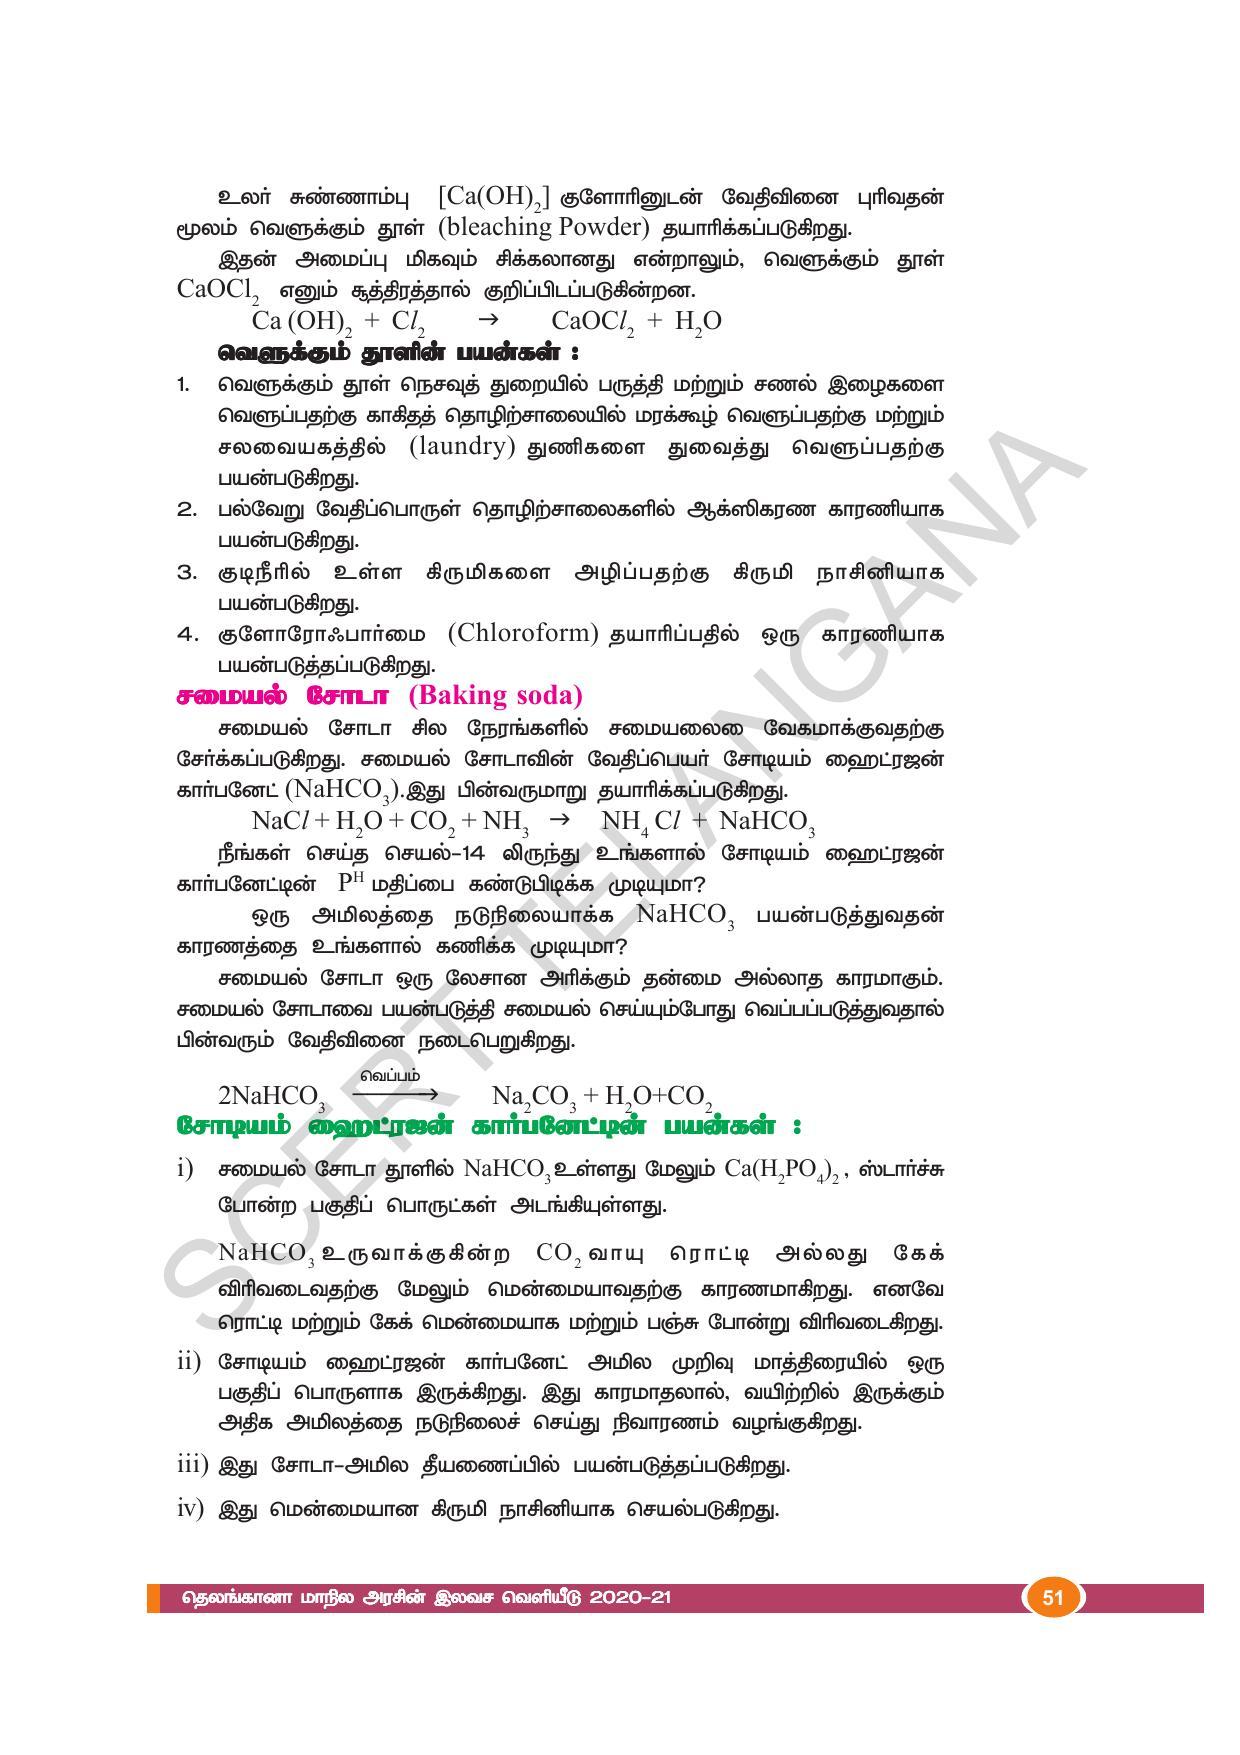 TS SCERT Class 10 Physical Science(Tamil Medium) Text Book - Page 63